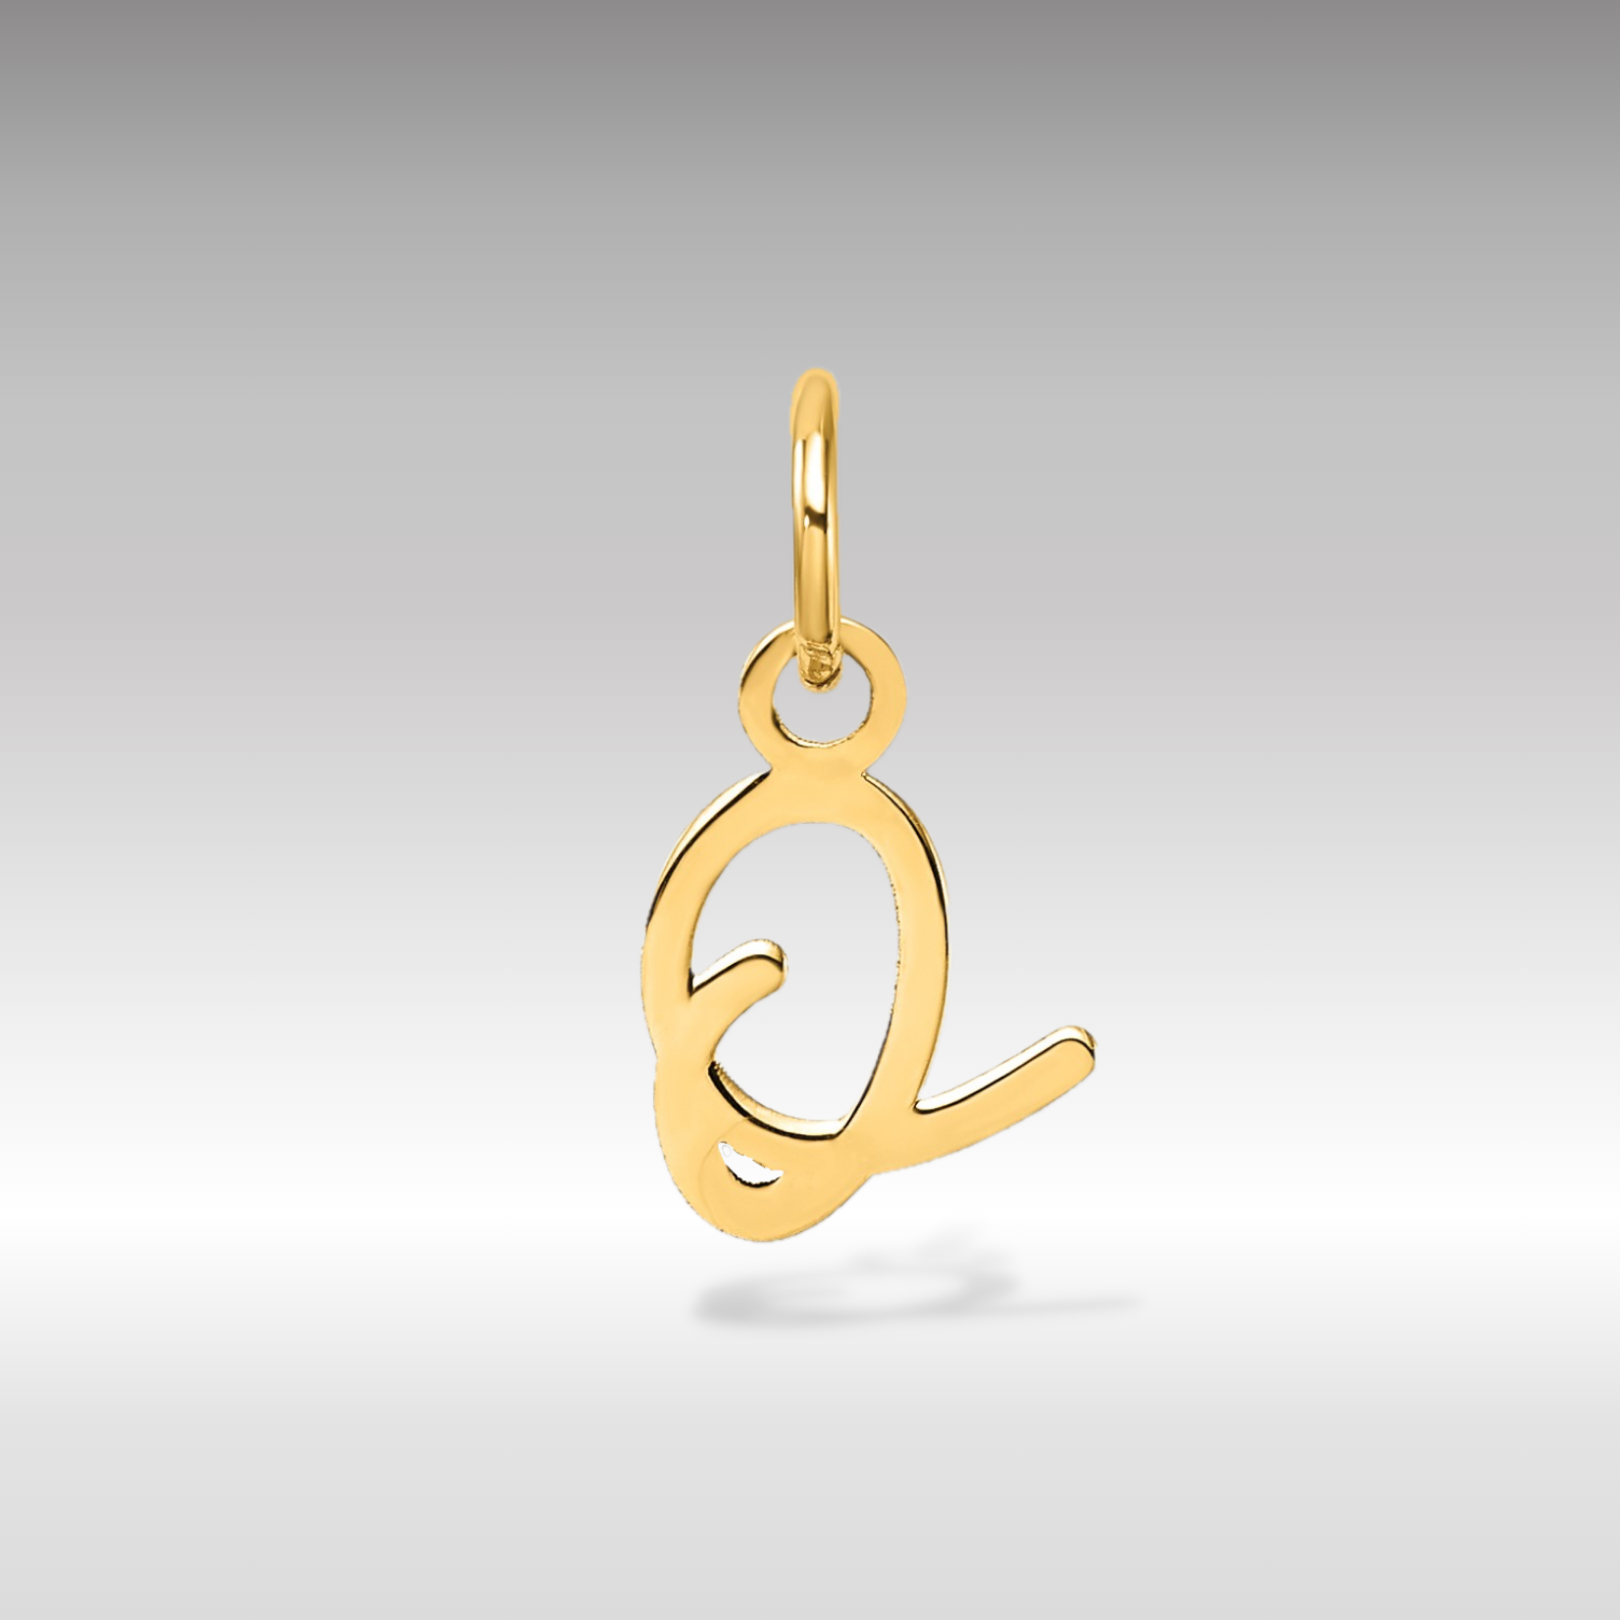 14K Gold Small Script Letter "O" Initial Pendant - Charlie & Co. Jewelry